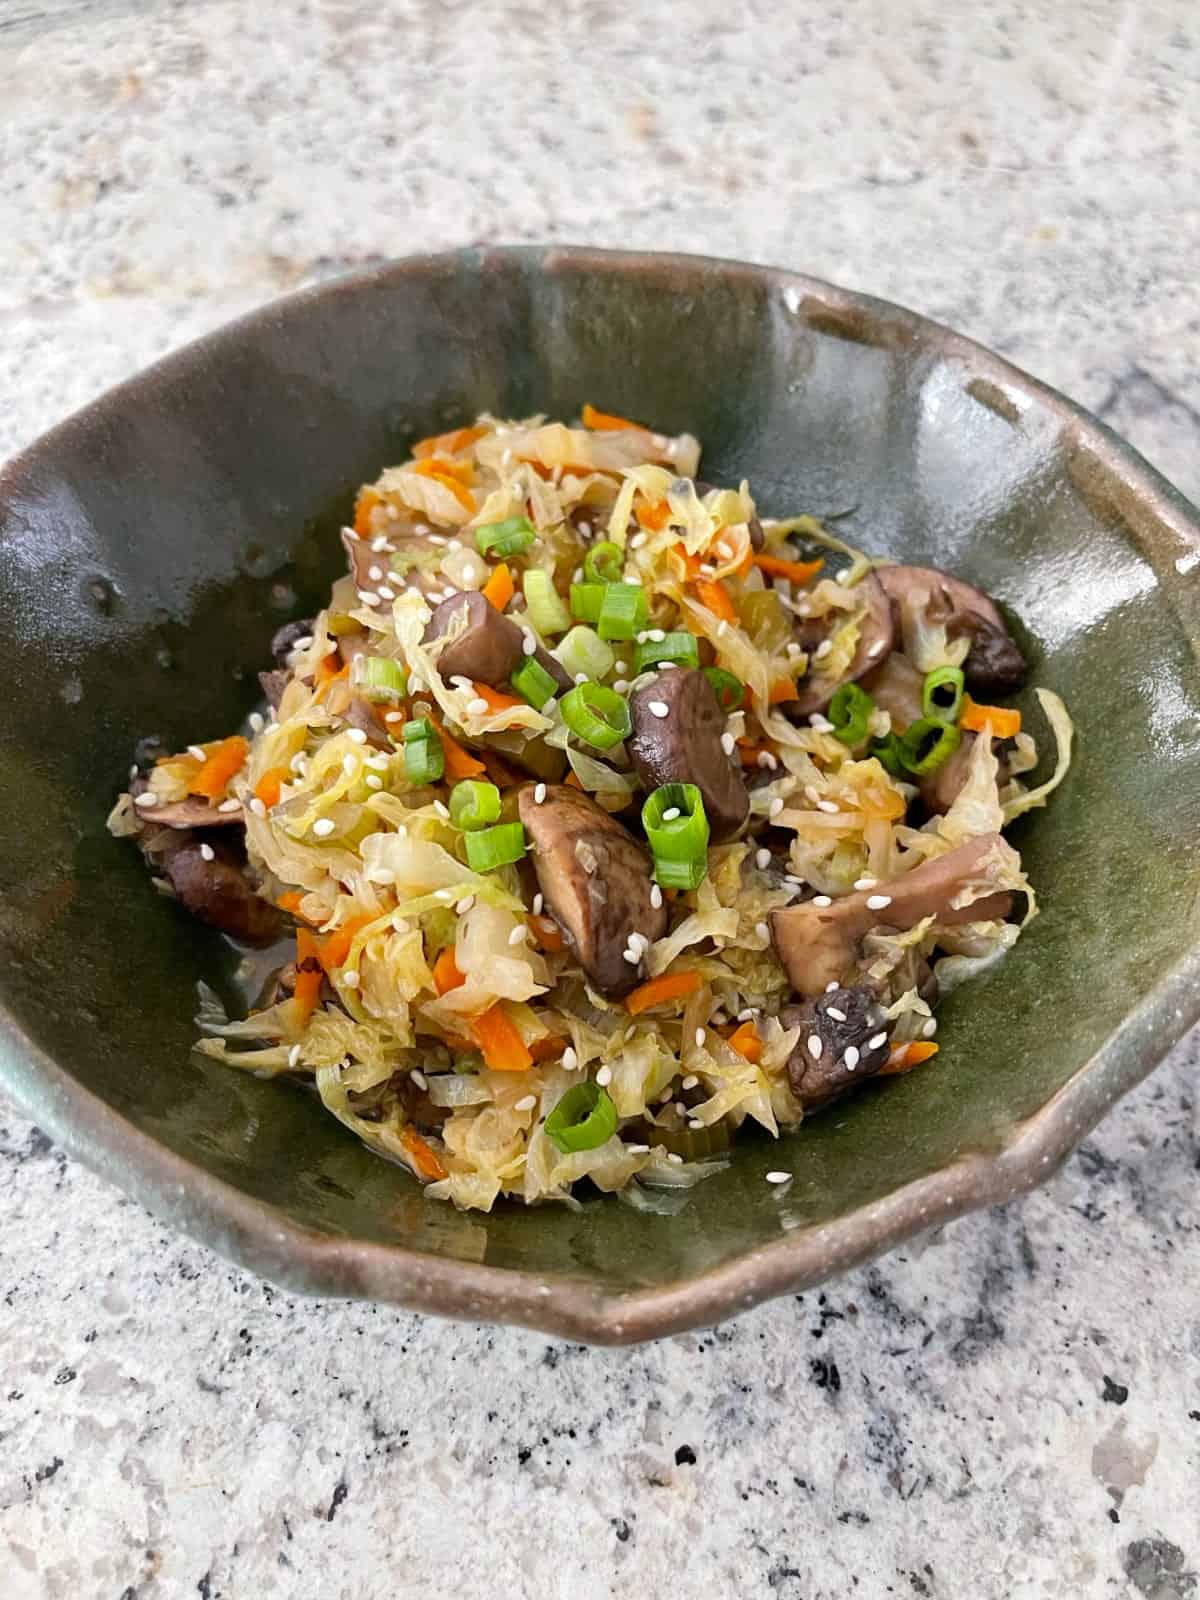 Instant Pot Egg Roll in a Bowl - I Don't Have Time For That!